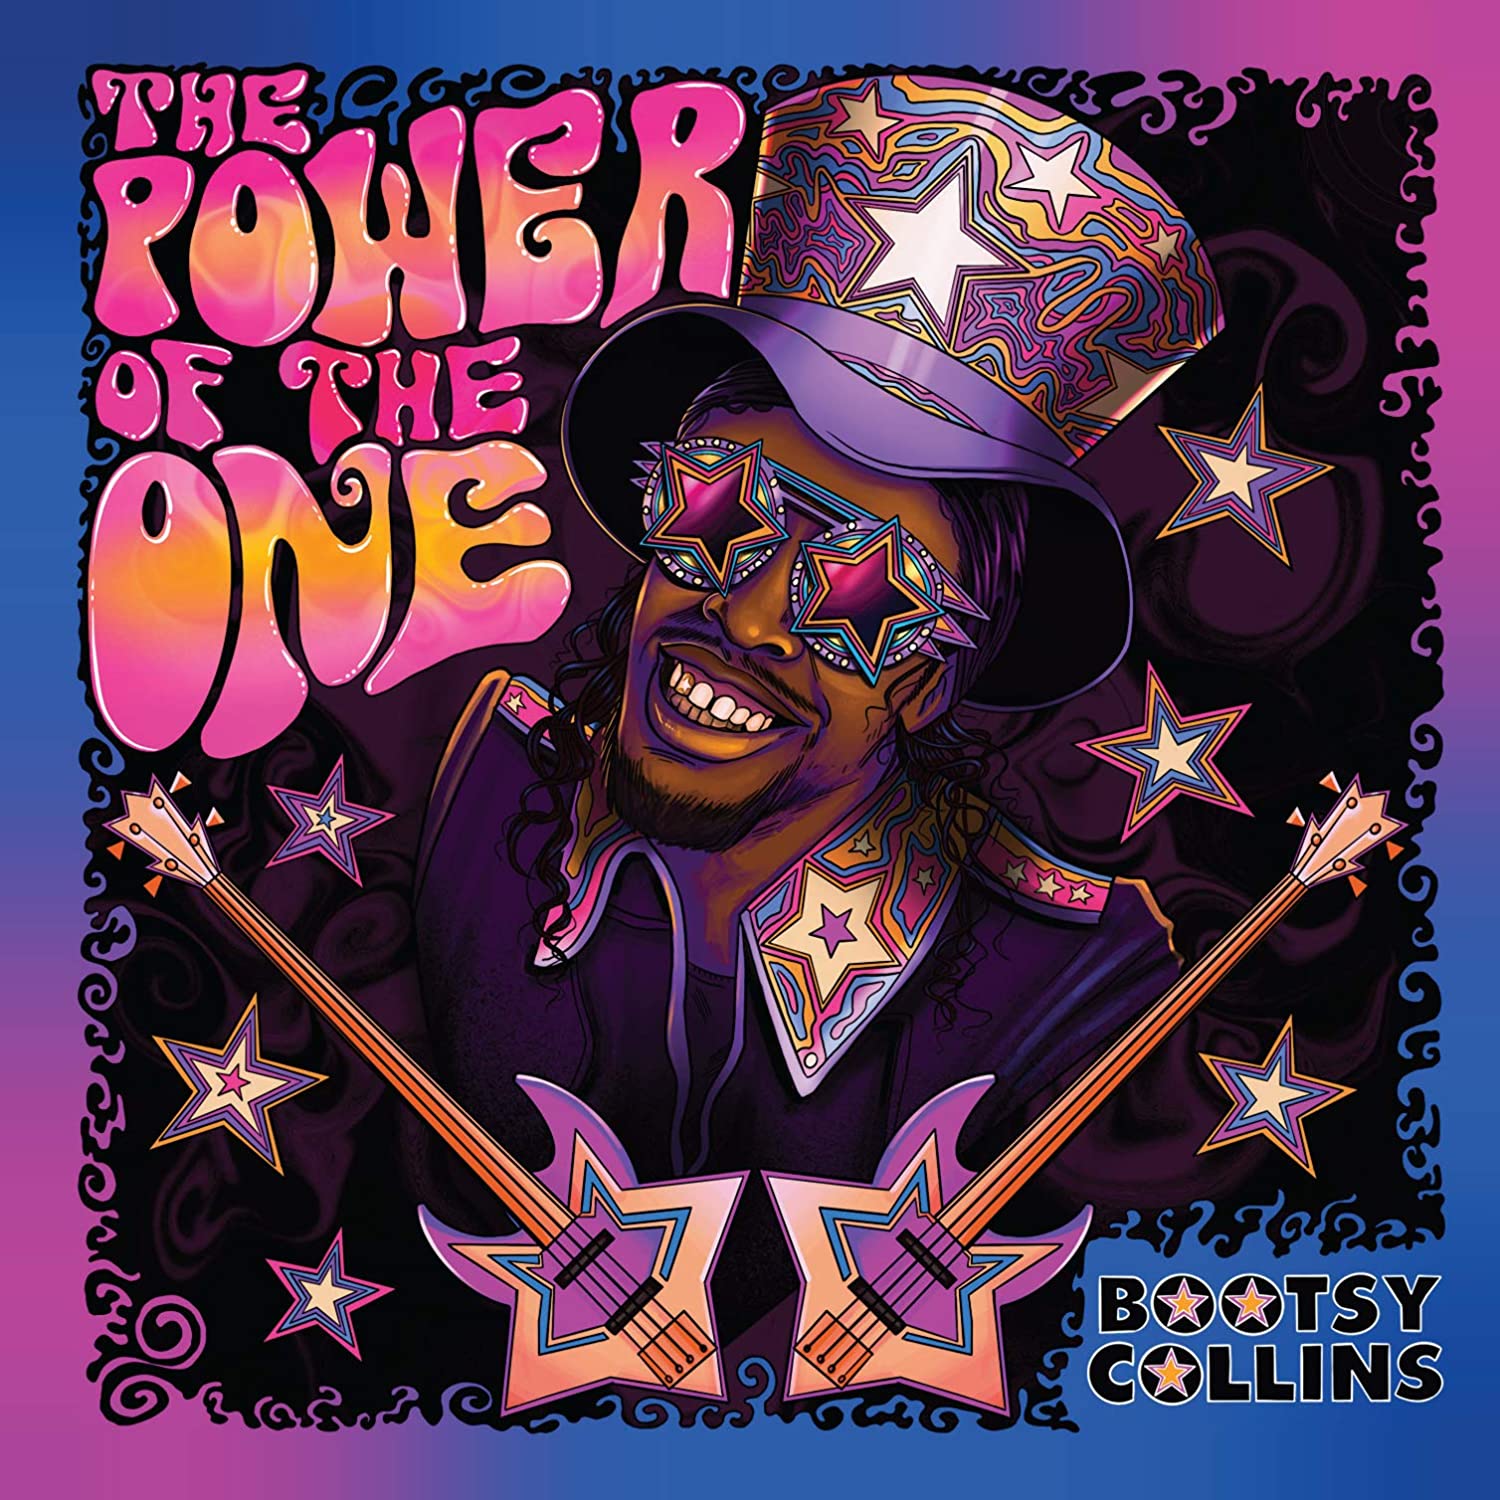 Bootsy Collins: The Power of the One